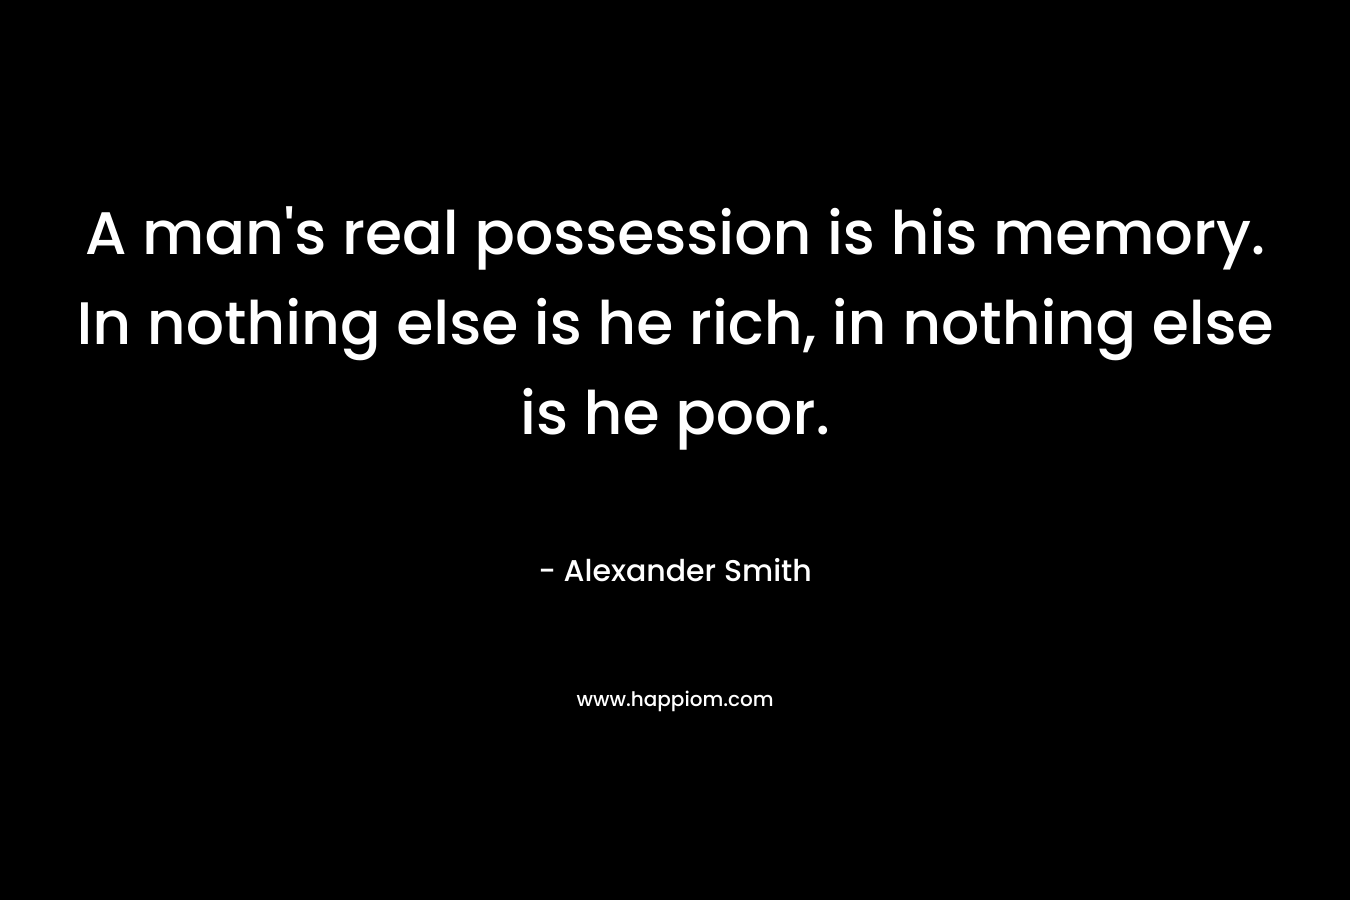 A man's real possession is his memory. In nothing else is he rich, in nothing else is he poor.